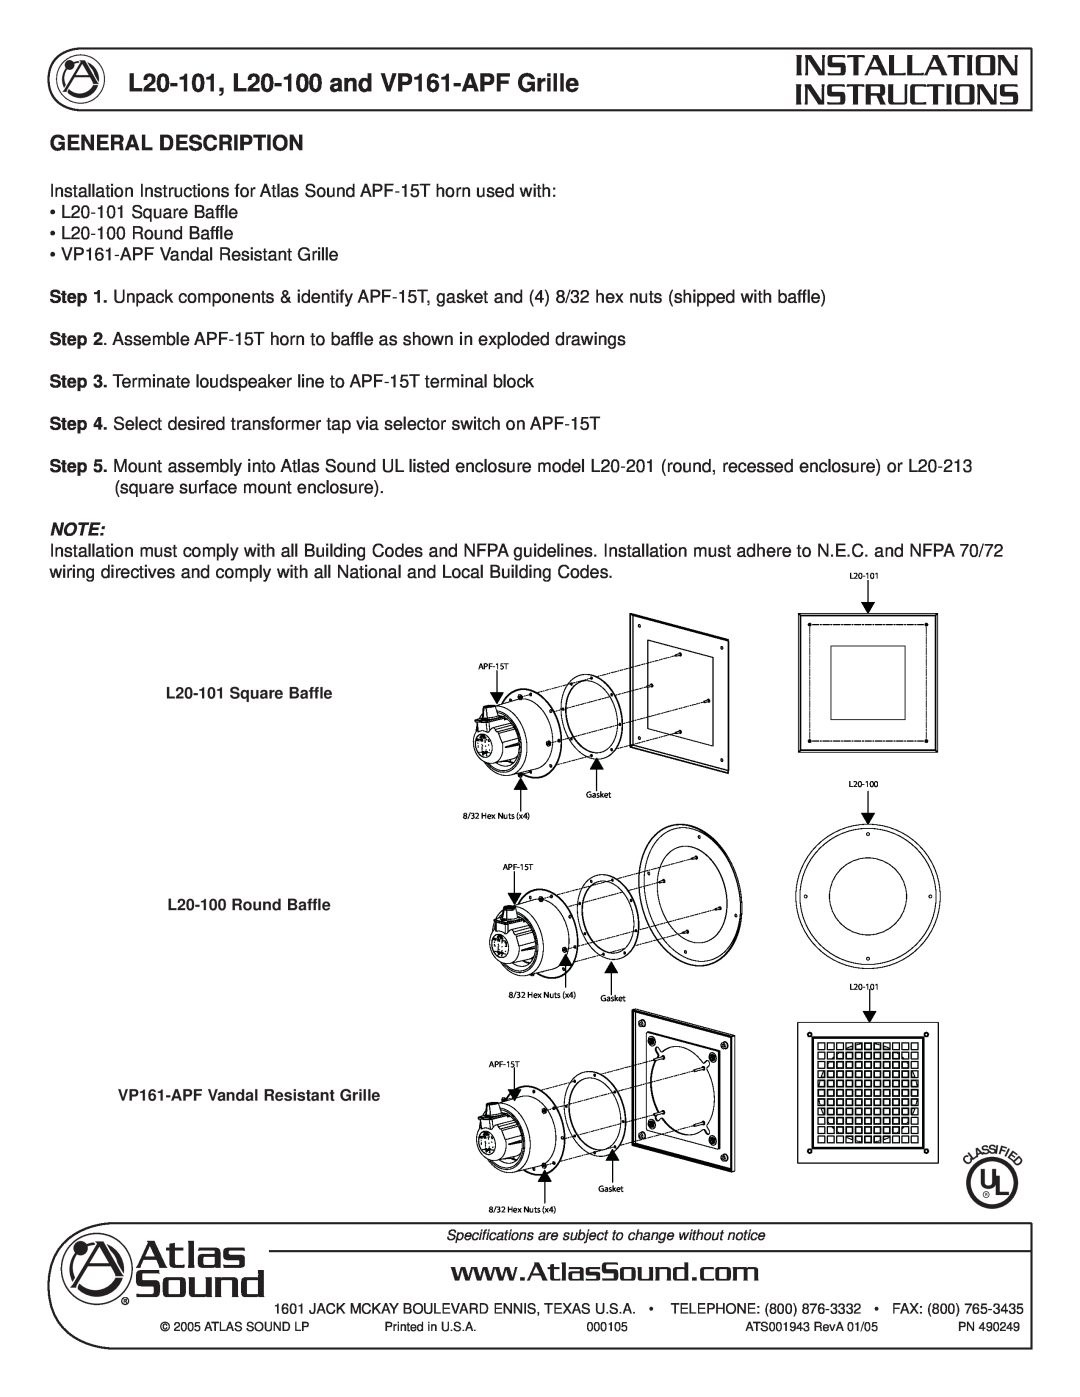 Atlas Sound installation instructions Installation Instructions, L20-101, L20-100and VP161-APFGrille 